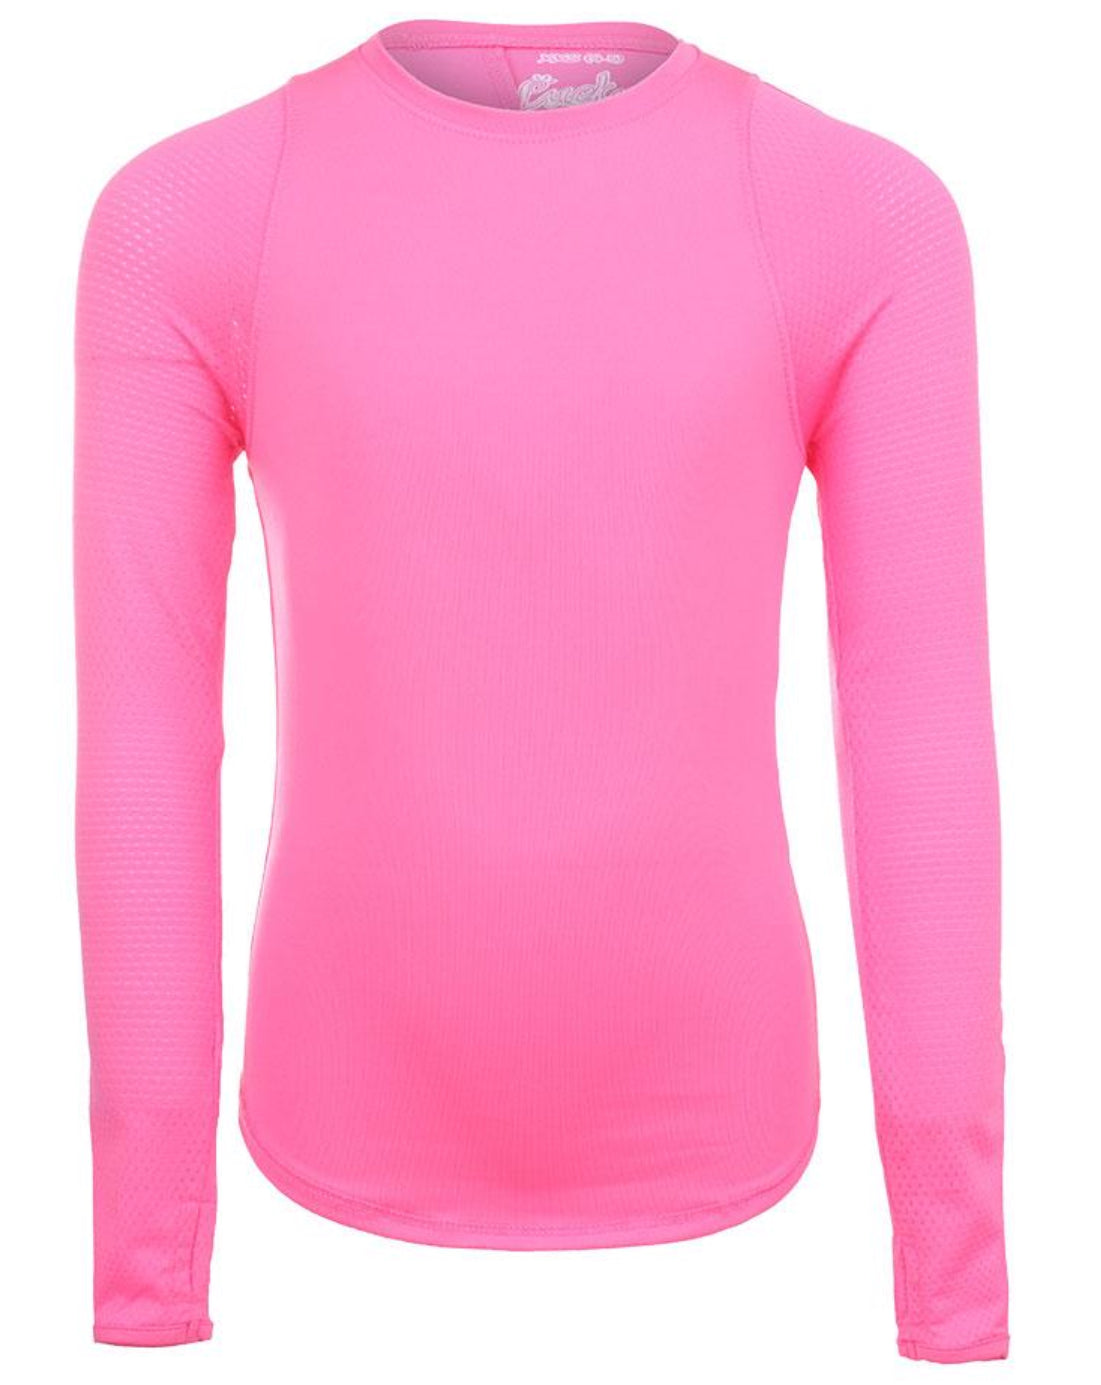 Lucky in Love Girls' Athletic Crew Long Sleeve Tennis Top